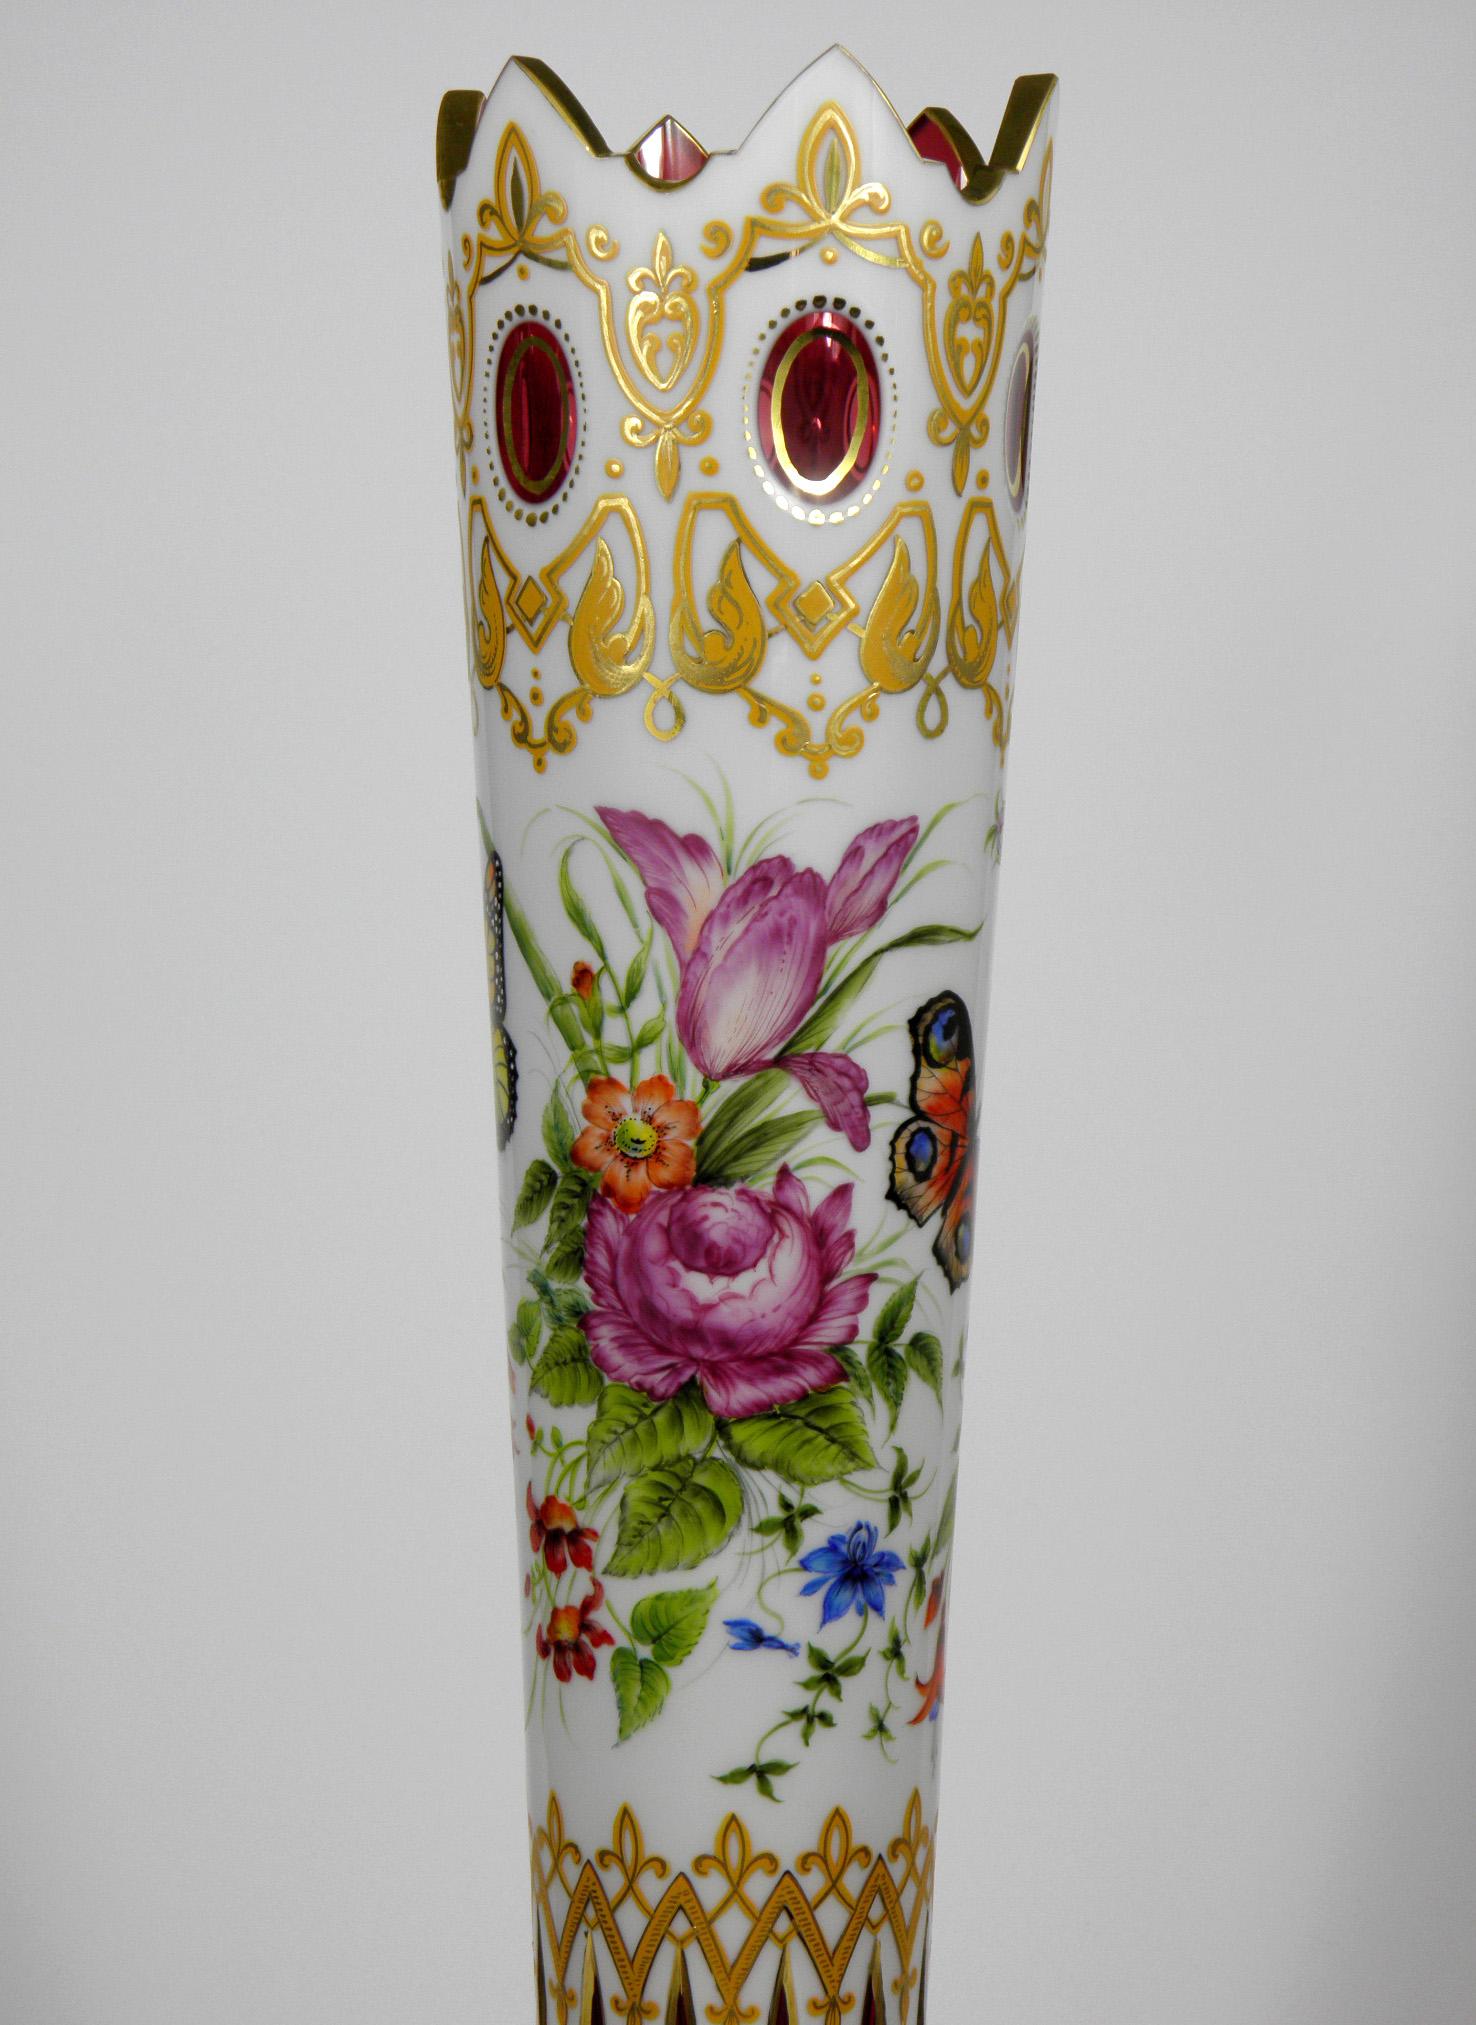 Beautiful slim tall ruby ??vase overlaid with opal, upper crown cut, ornamental floral painting with butterflies. Made in the style of the 19th century.